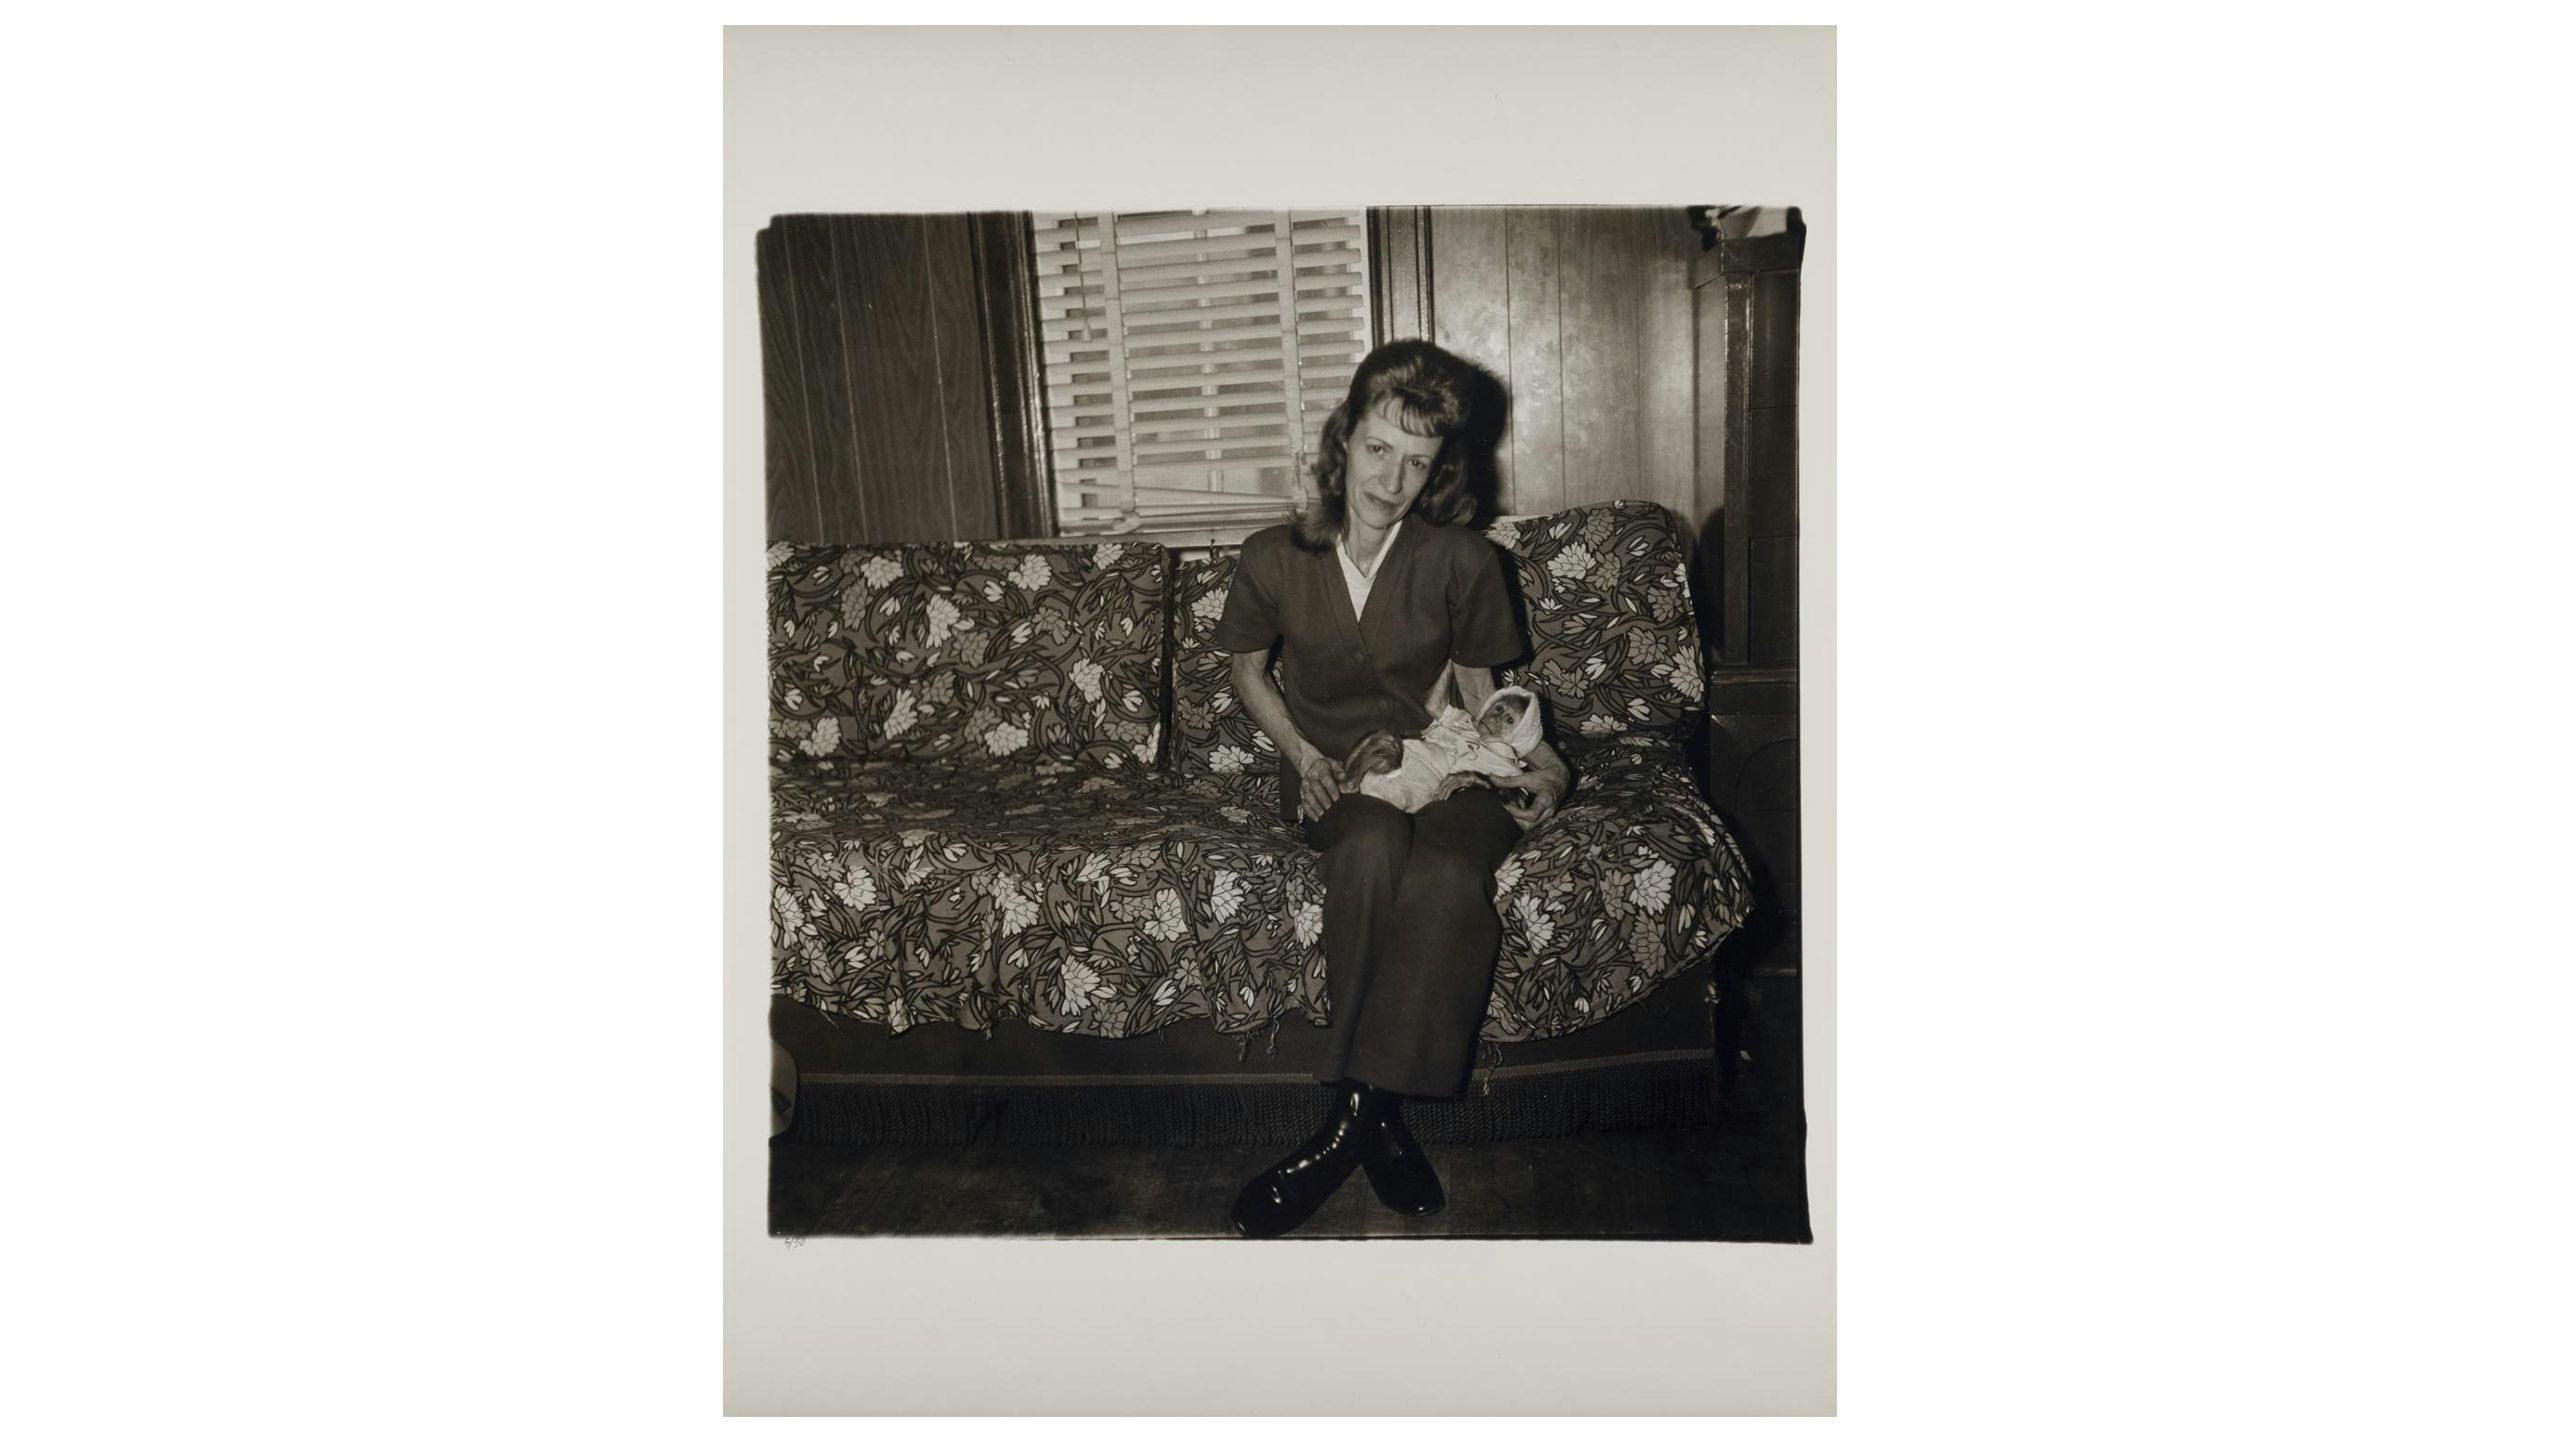 A photograph by Diane Arbus, titled Mrs. Gladys ‘Mitzi’ Ulrich with the baby, Sam, a stump-tailed macaque monkey, North Bergen N.J. 1971, Smithsonian American Art Museum, Museum purchase.